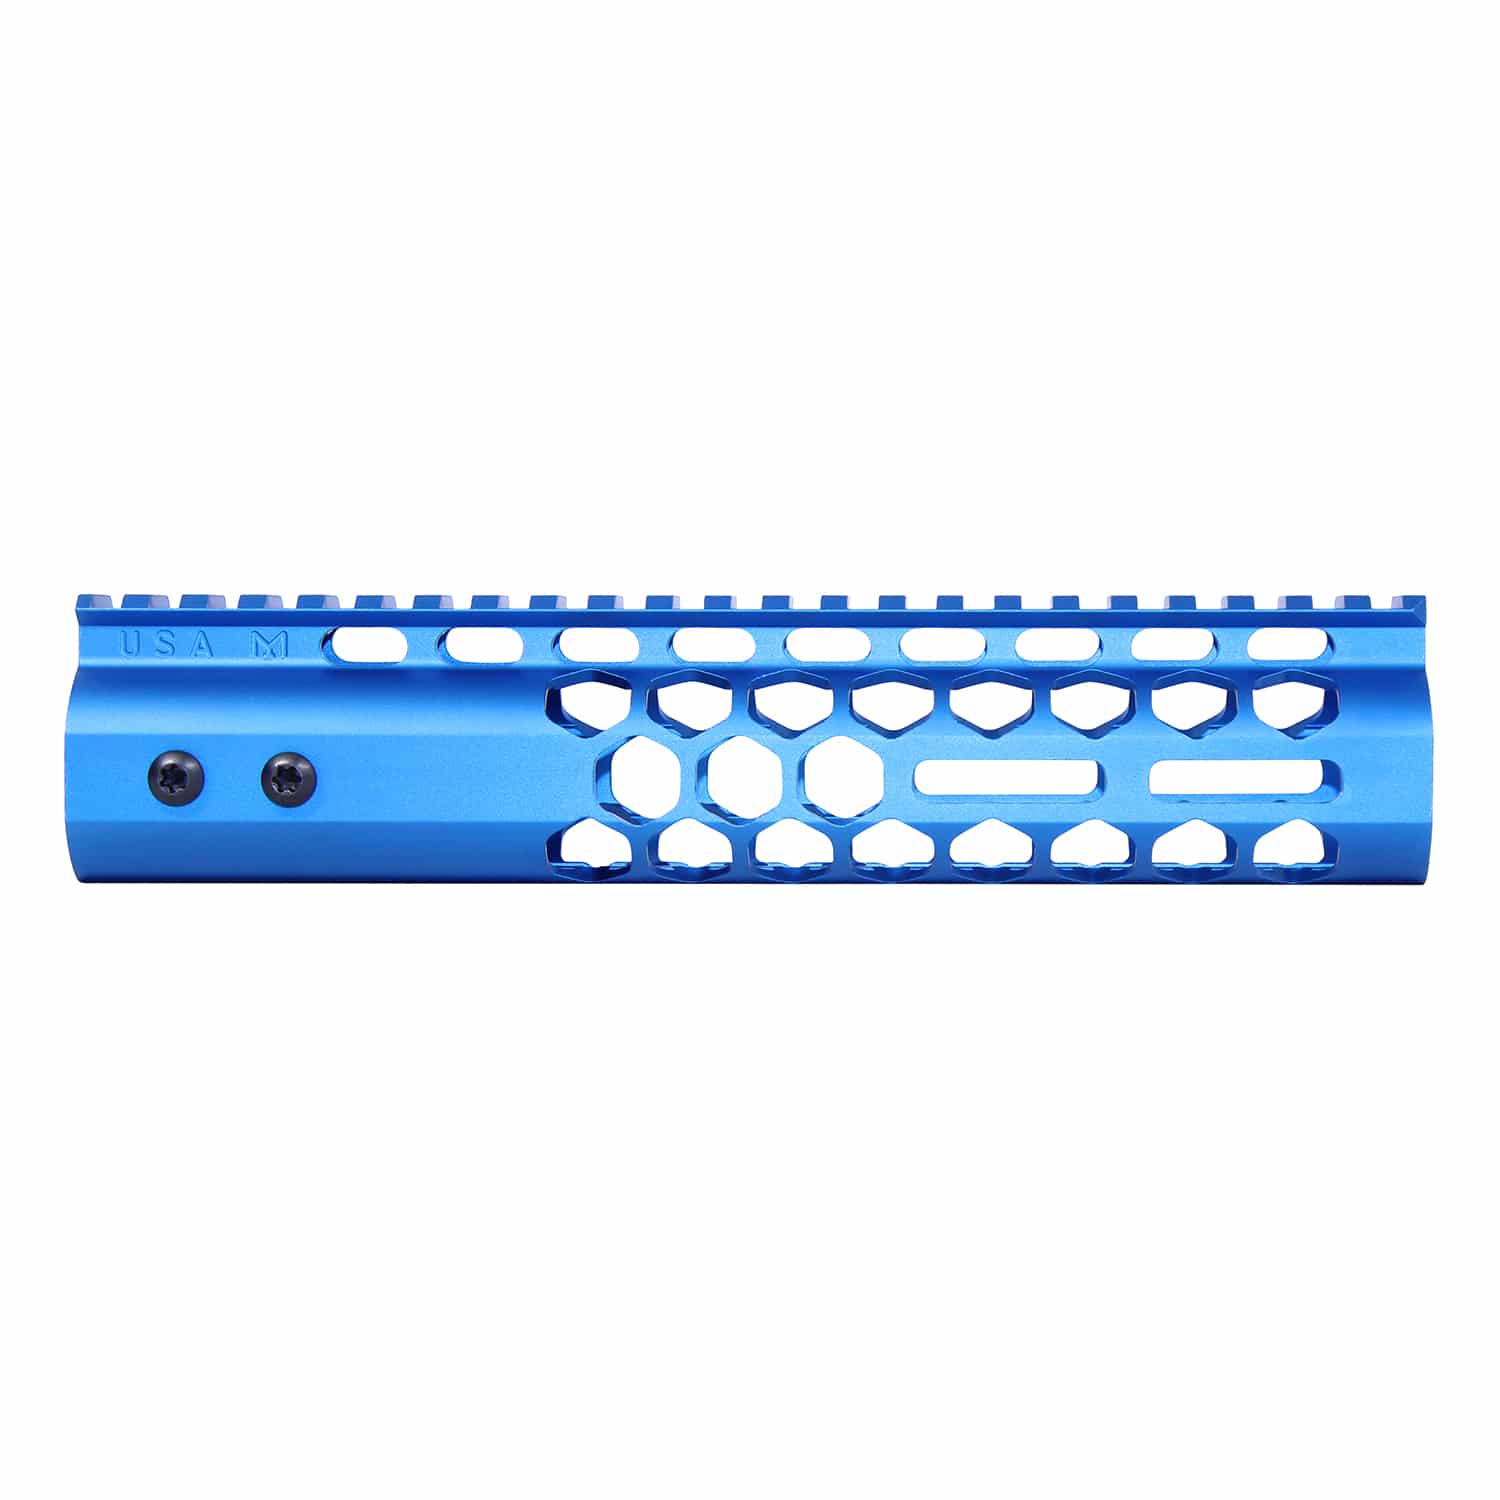 9" Air Lite Series 'Honeycomb' M-LOK Free Floating Handguard With Monolithic Top Rail (Anodized Blue)